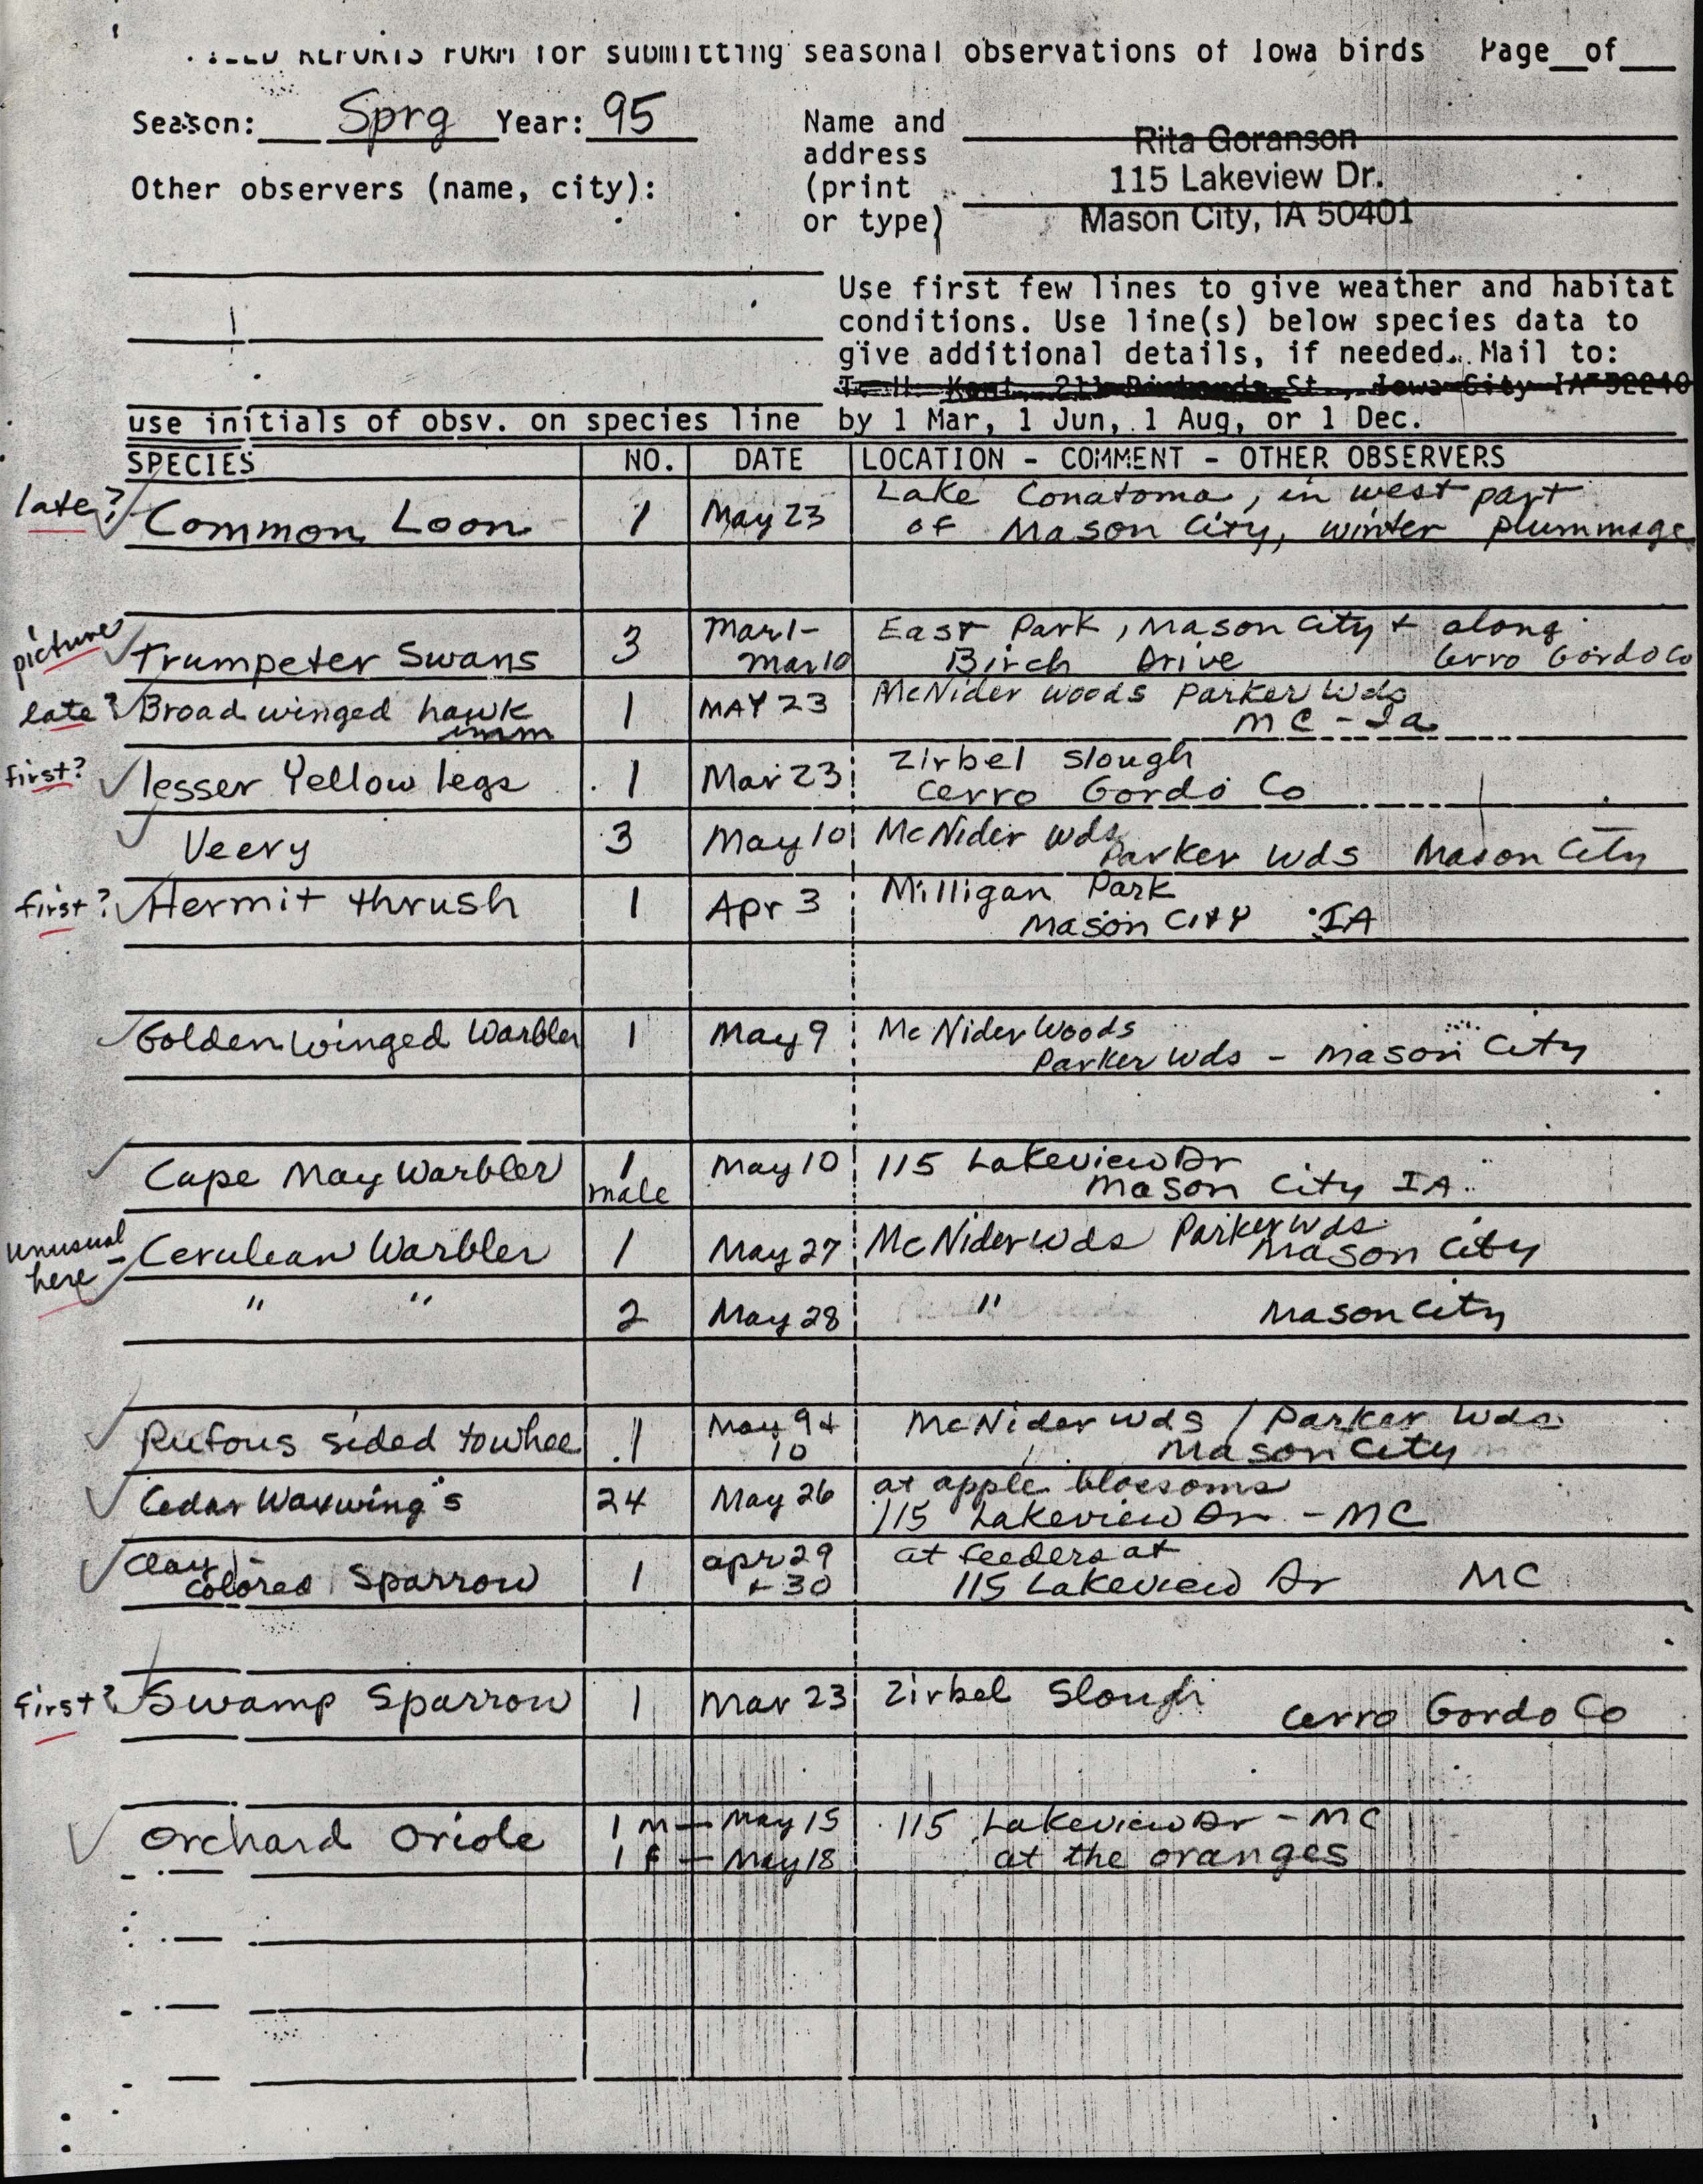 Field reports form for submitting seasonal observations of Iowa birds, spring 1995, Rita Goranson